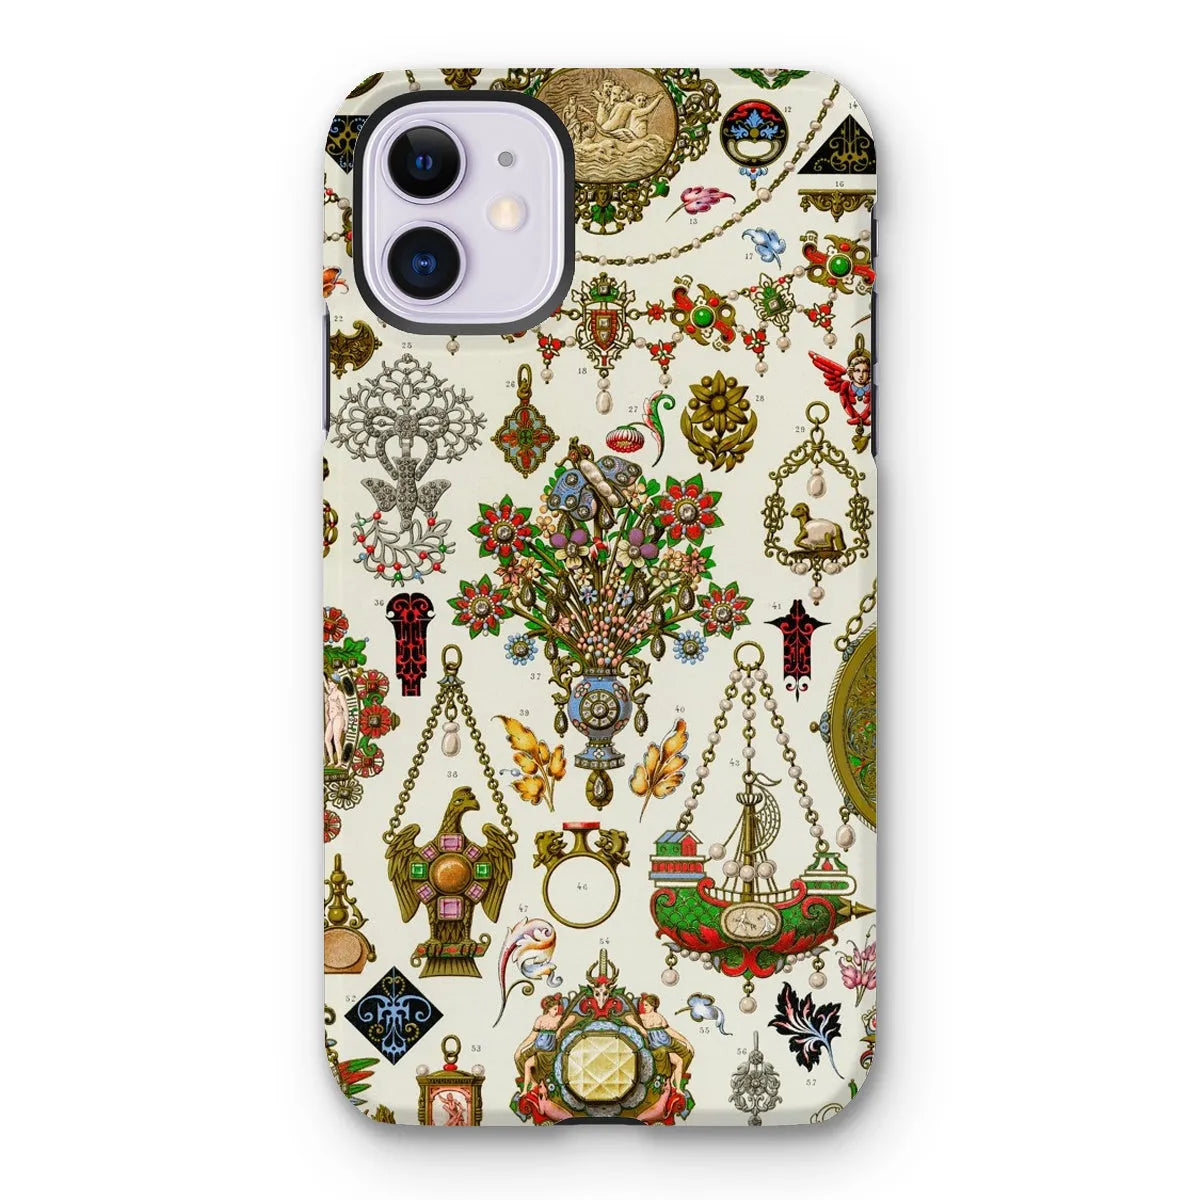 French Jewelry By Auguste Racinet Tough Phone Case - Iphone 11 / Matte - Mobile Phone Cases - Aesthetic Art